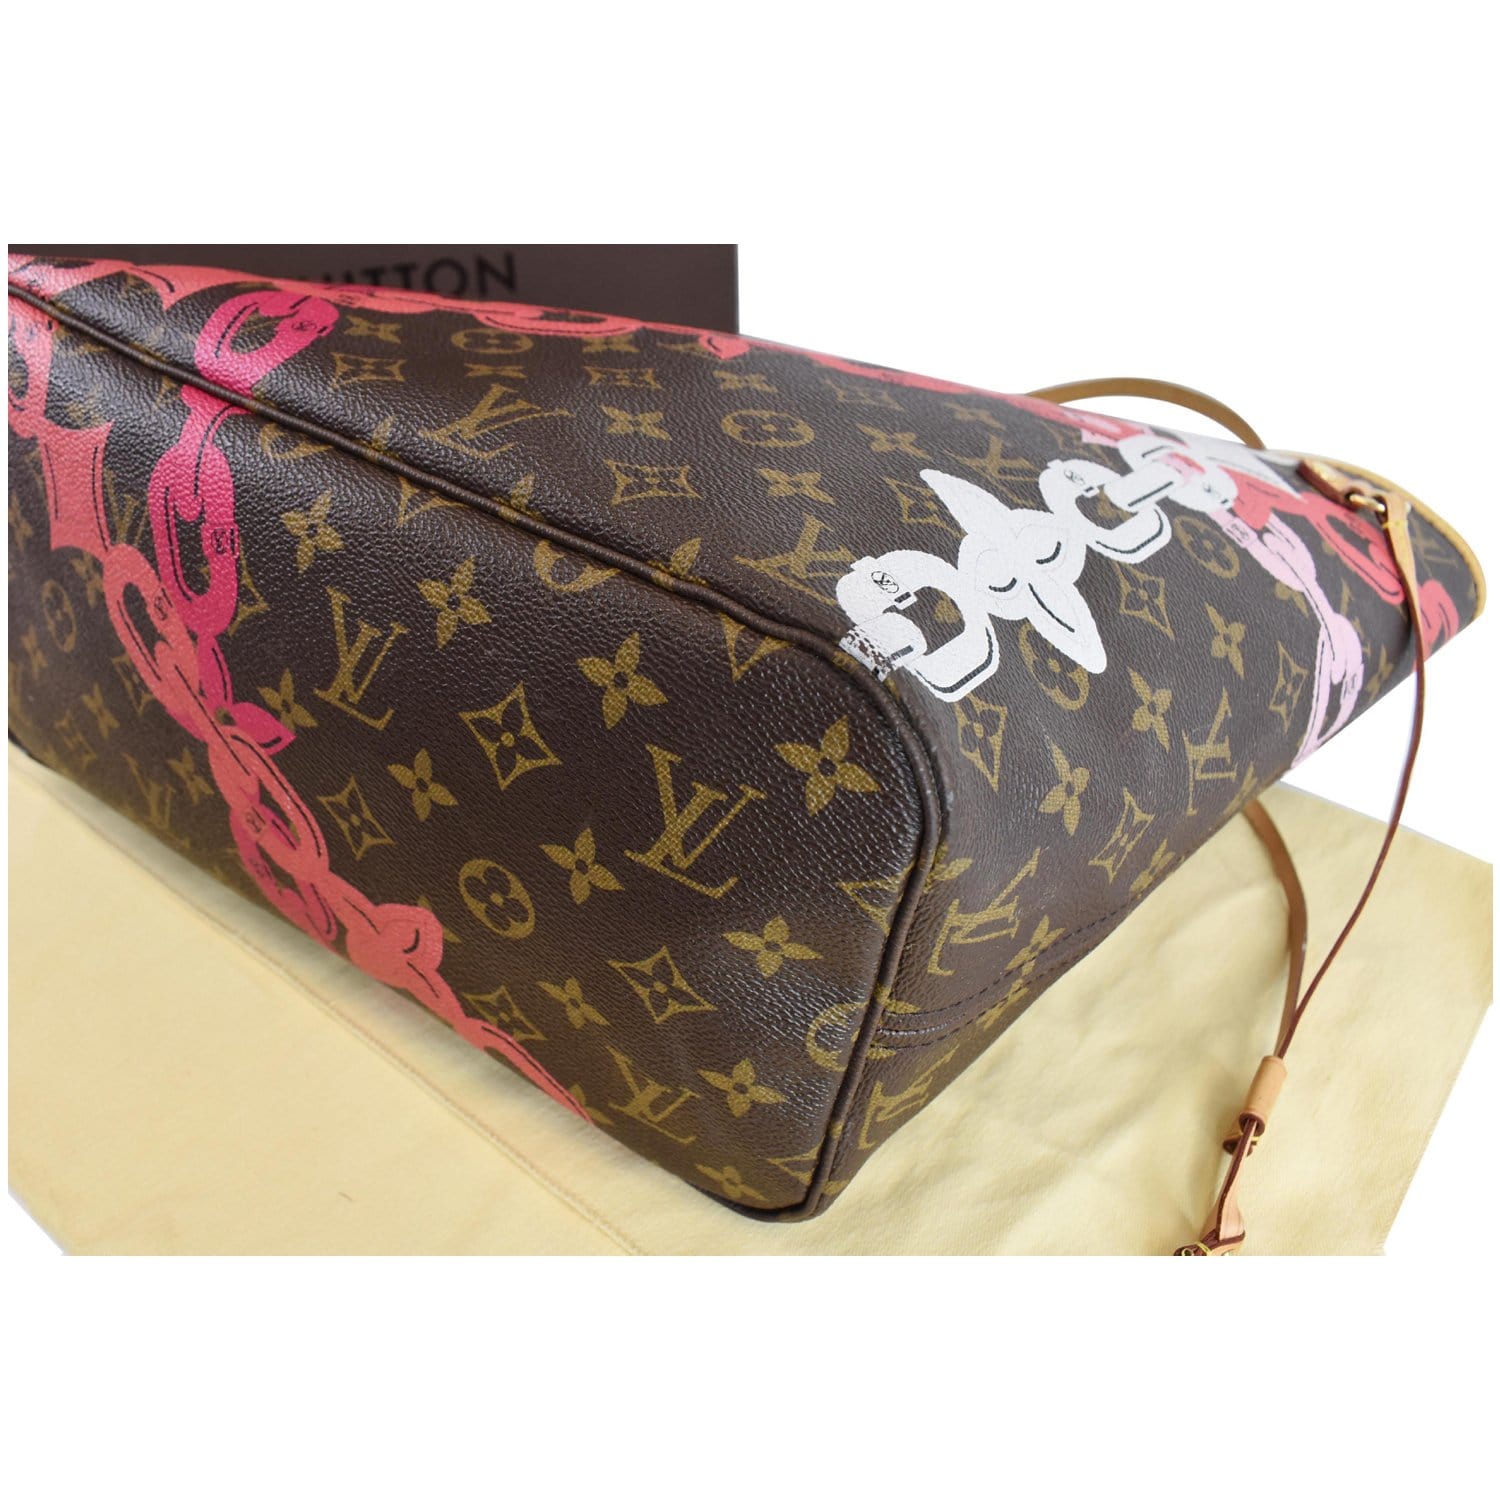 Authenticated Used Louis Vuitton Hawaii Exclusive On The Go GM Tote Bag  M20806 Cotton Canvas Leather 